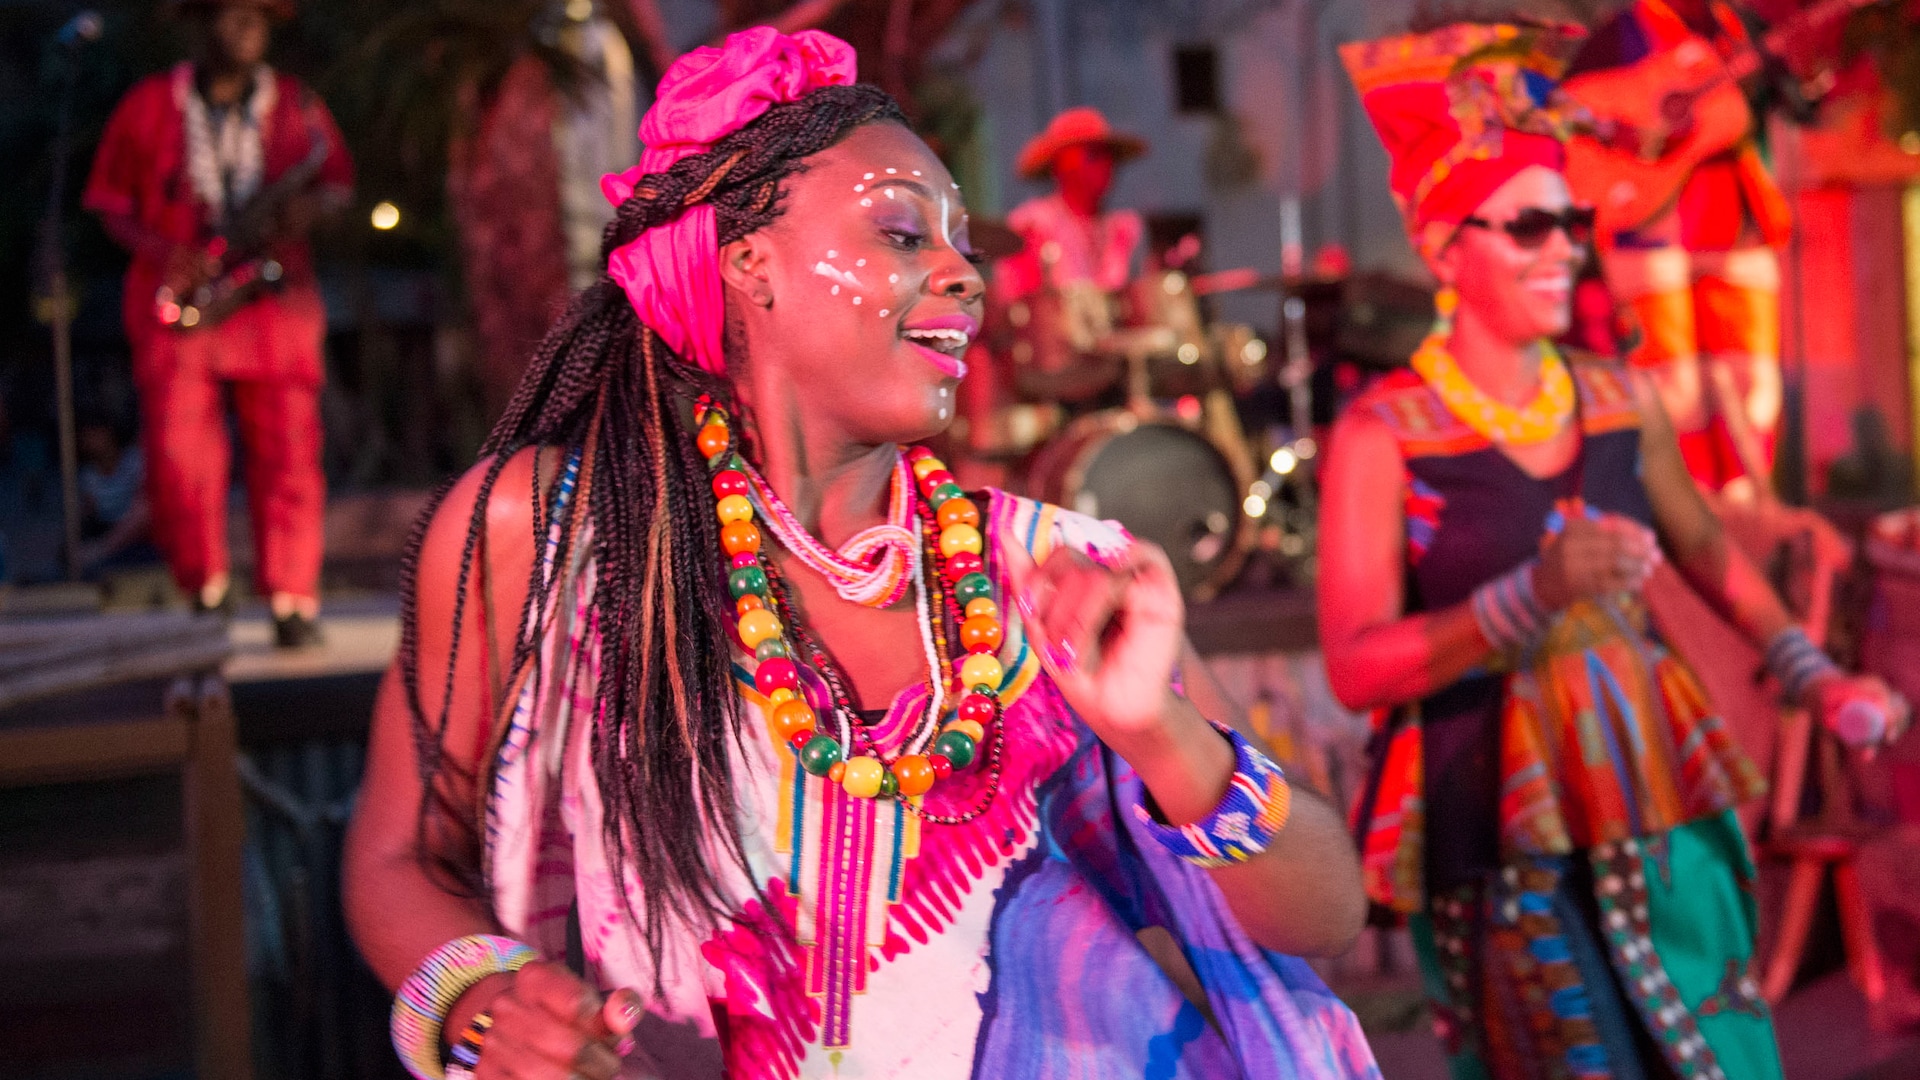 Two female performers wearing festive African style dresses and adornments dance joyously on stage as male musicians play instruments in the background